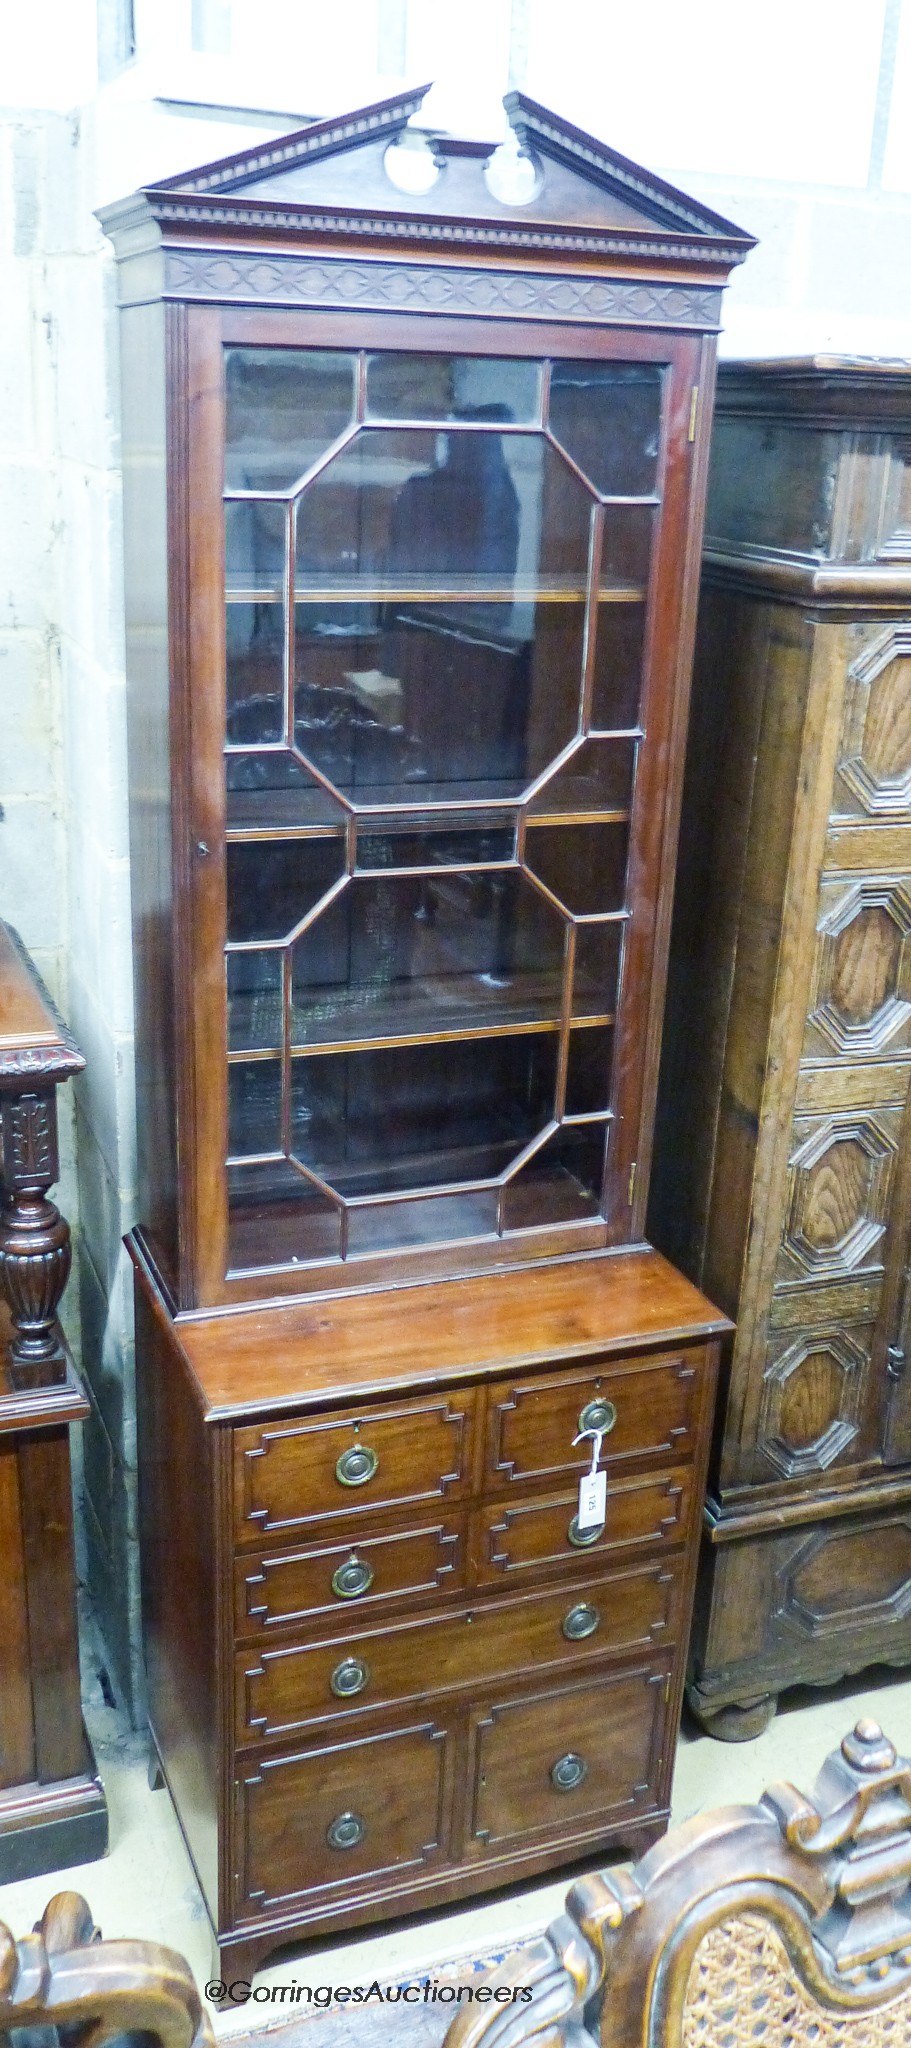 An early 20th century George III style narrow mahogany bookcase on chest, width 65cm, depth 44cm, height 218cm